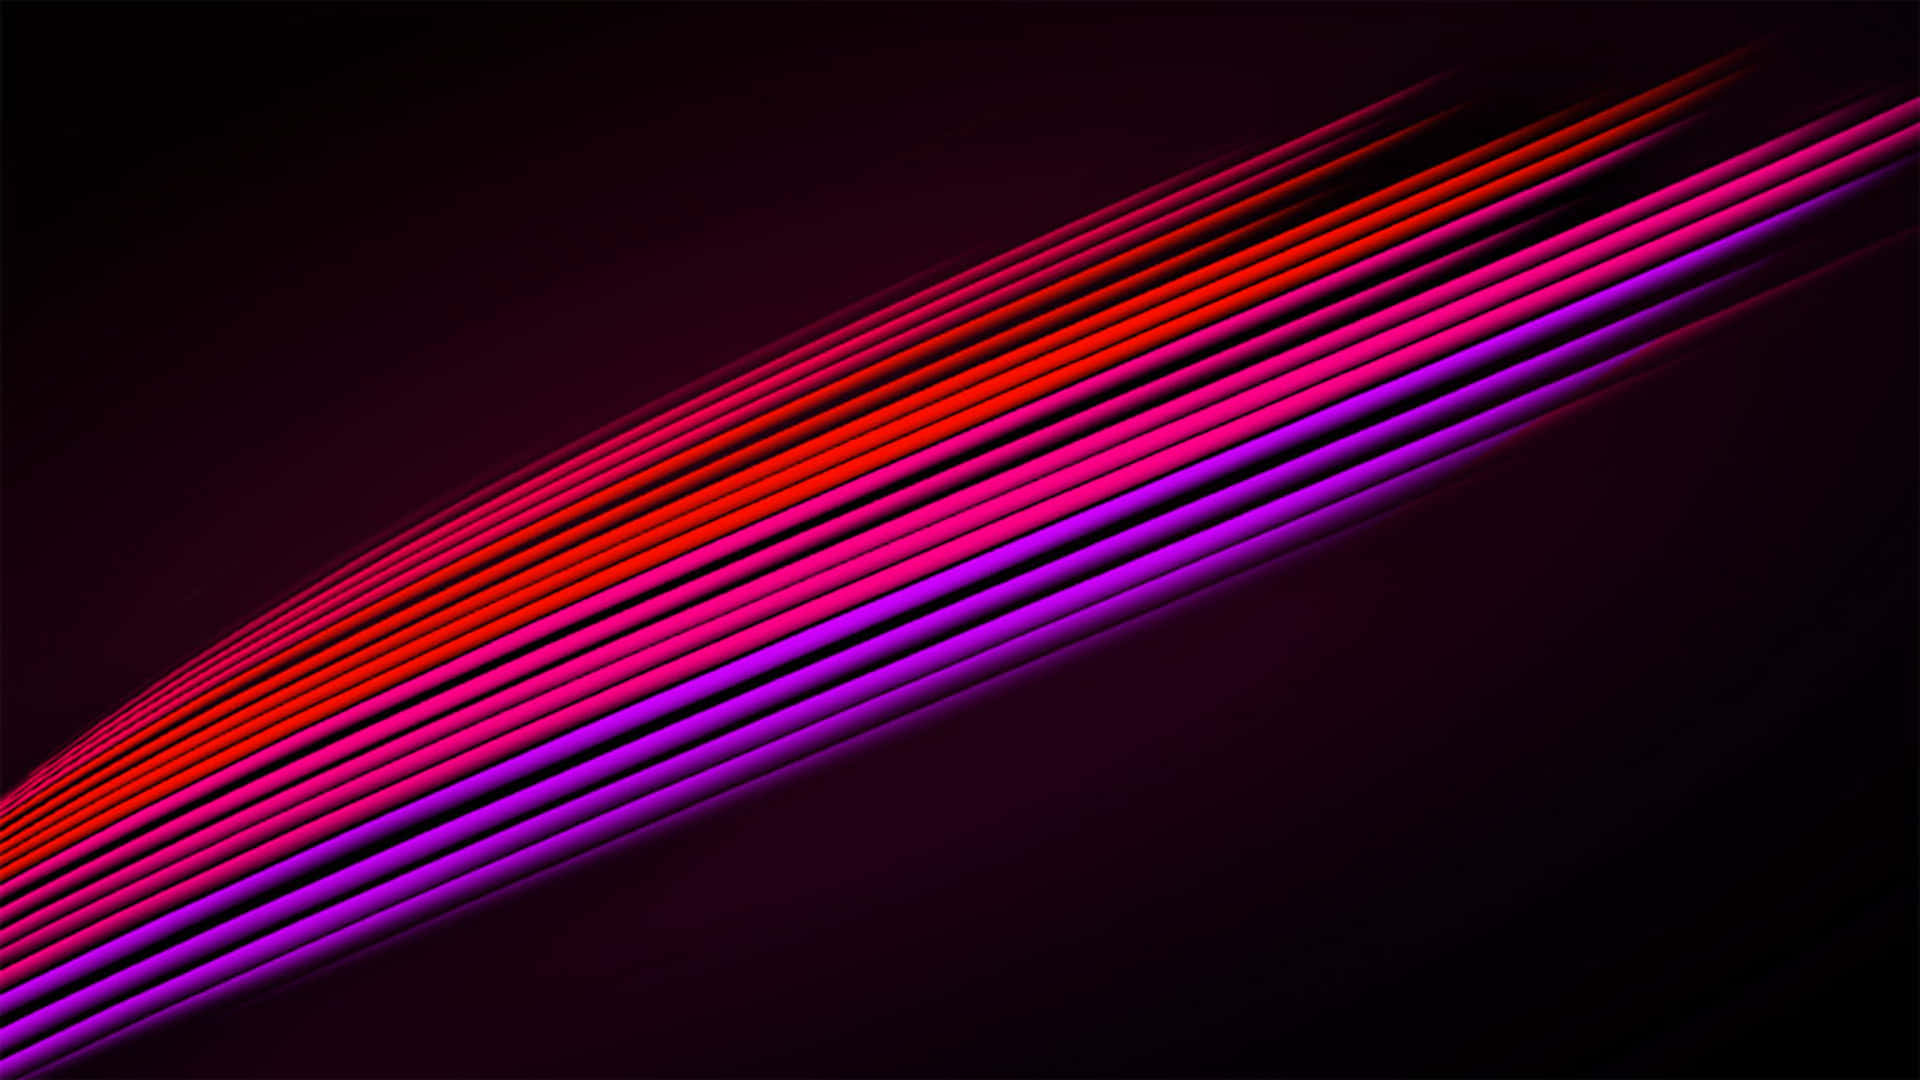 A Gorgeous Amoled Wallpaper in 1080p